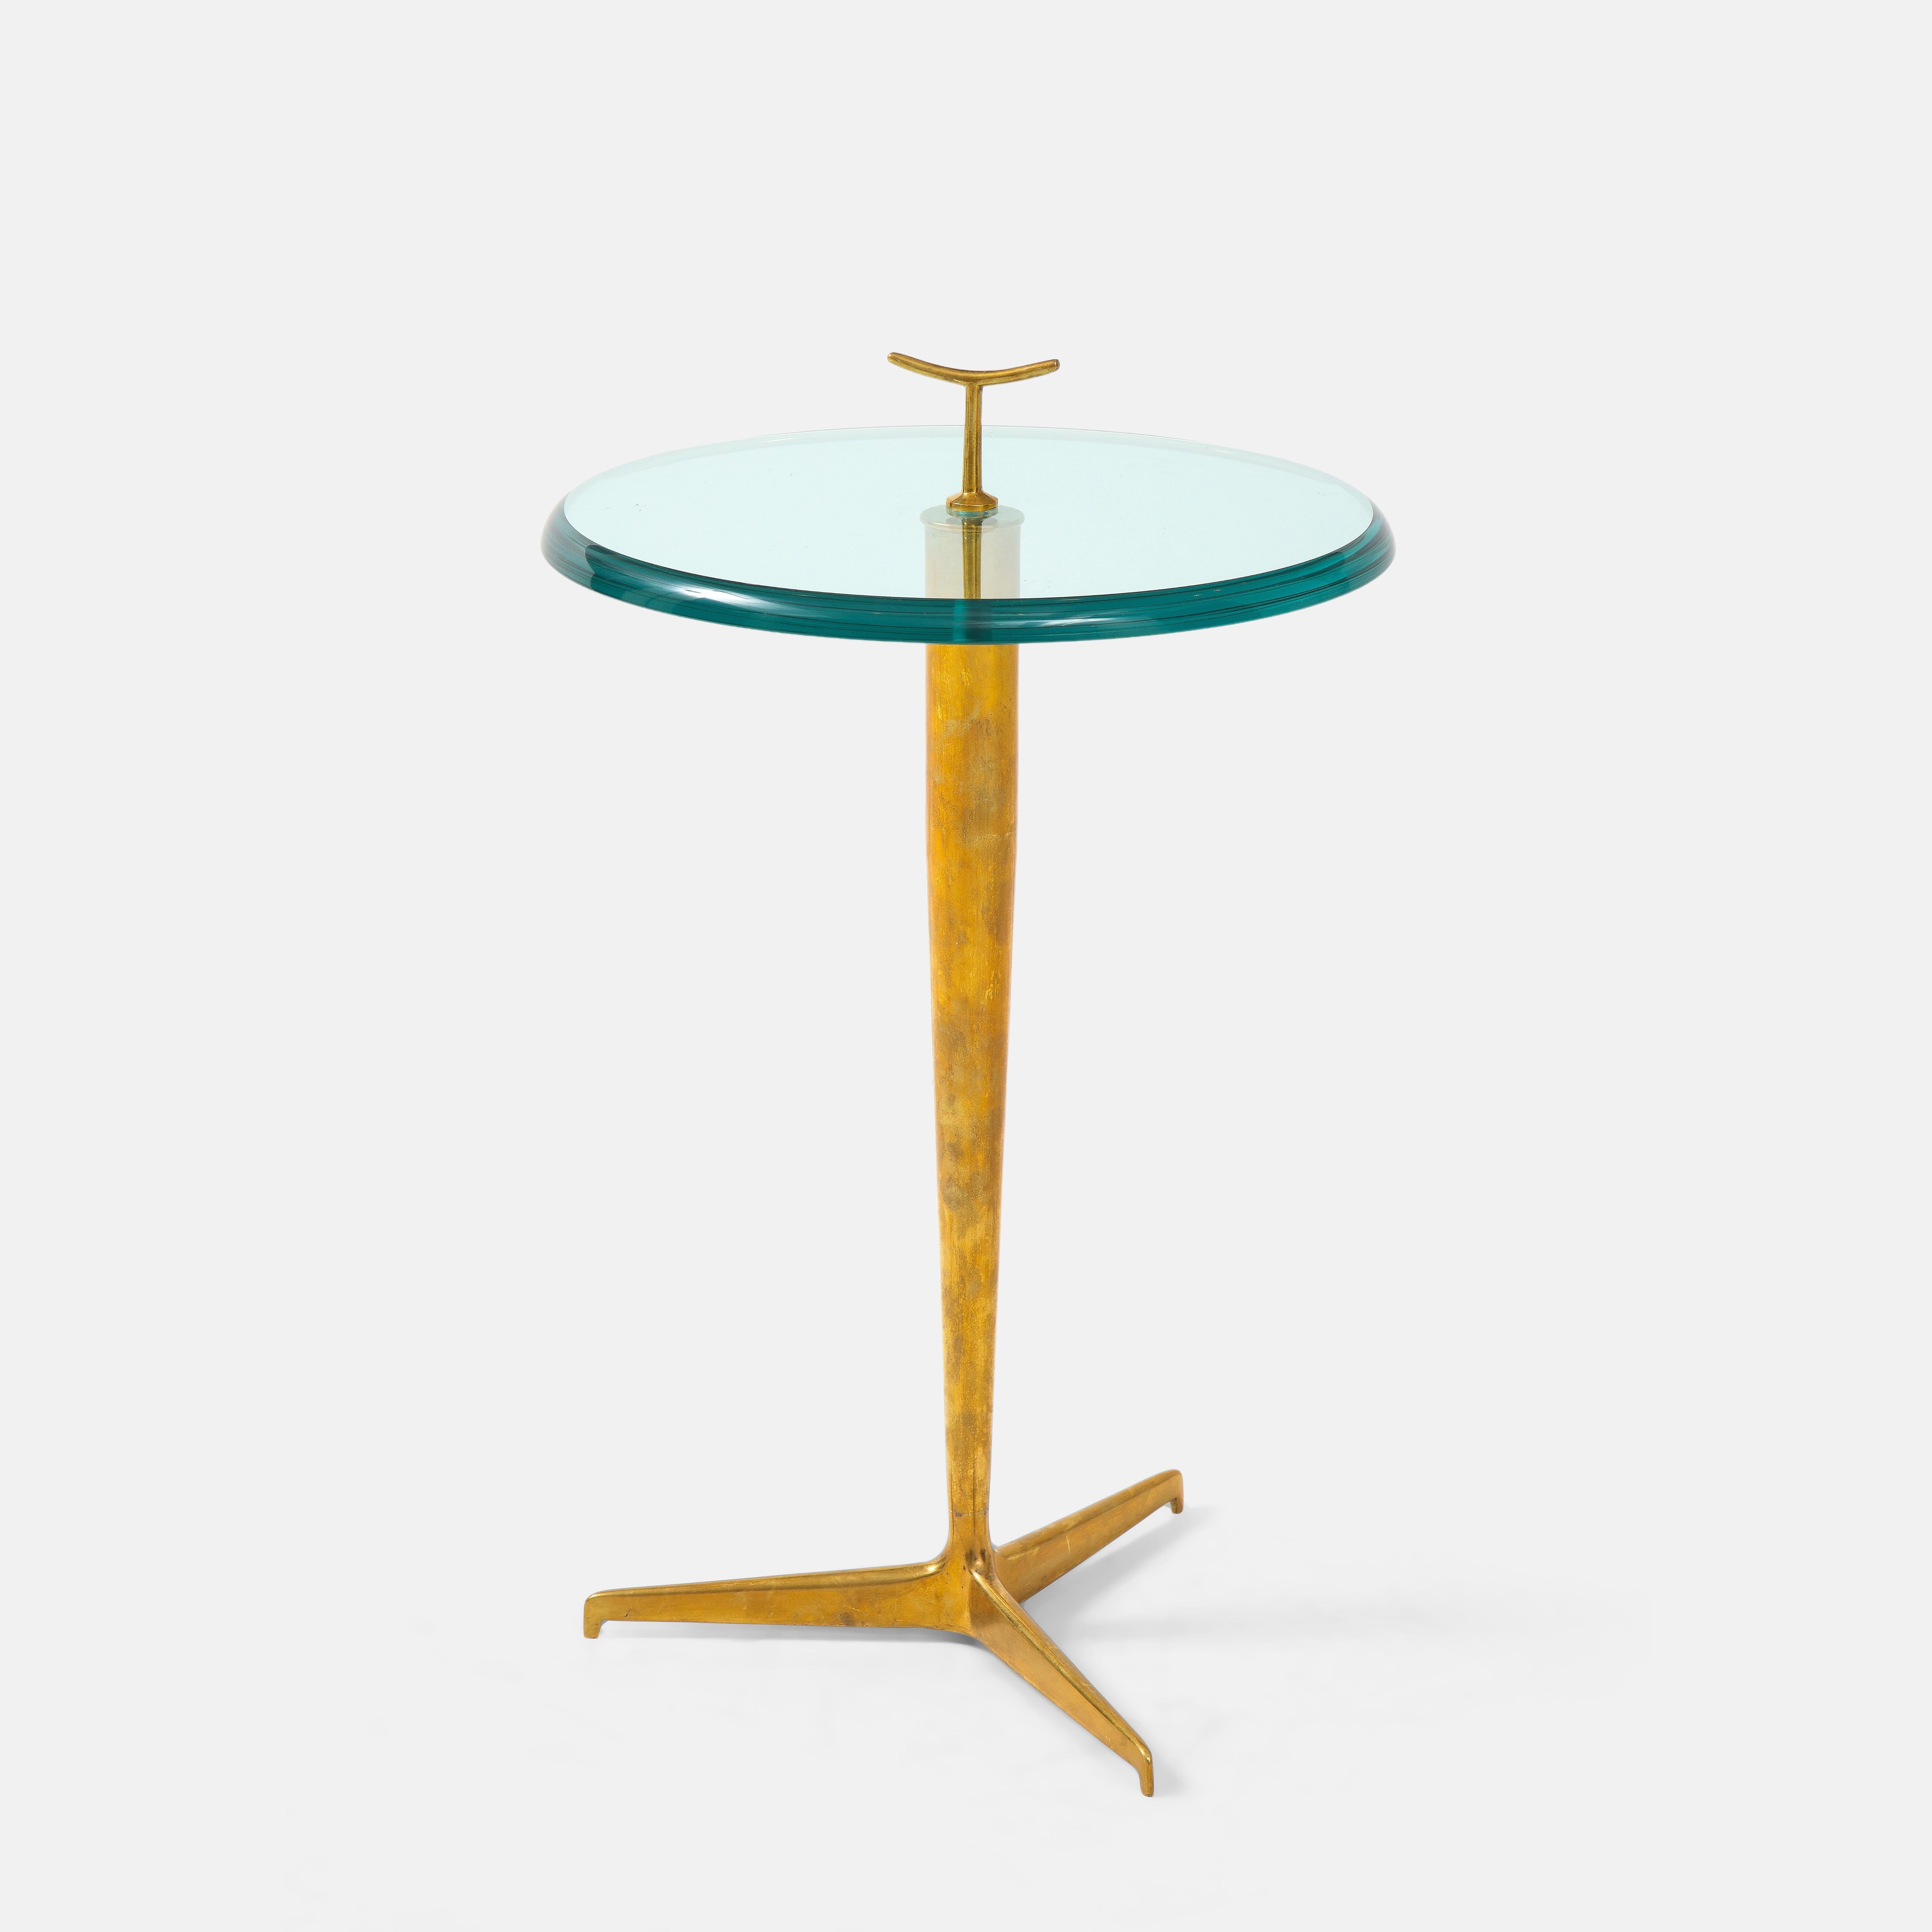 Side, occasional or drinks table in thick beveled glass with small brass handle detail on patinated brass tripod base, Italy, 2023. This chic modern side table is beautifully constructed with thick lens cut polished glass and richly patinated brass